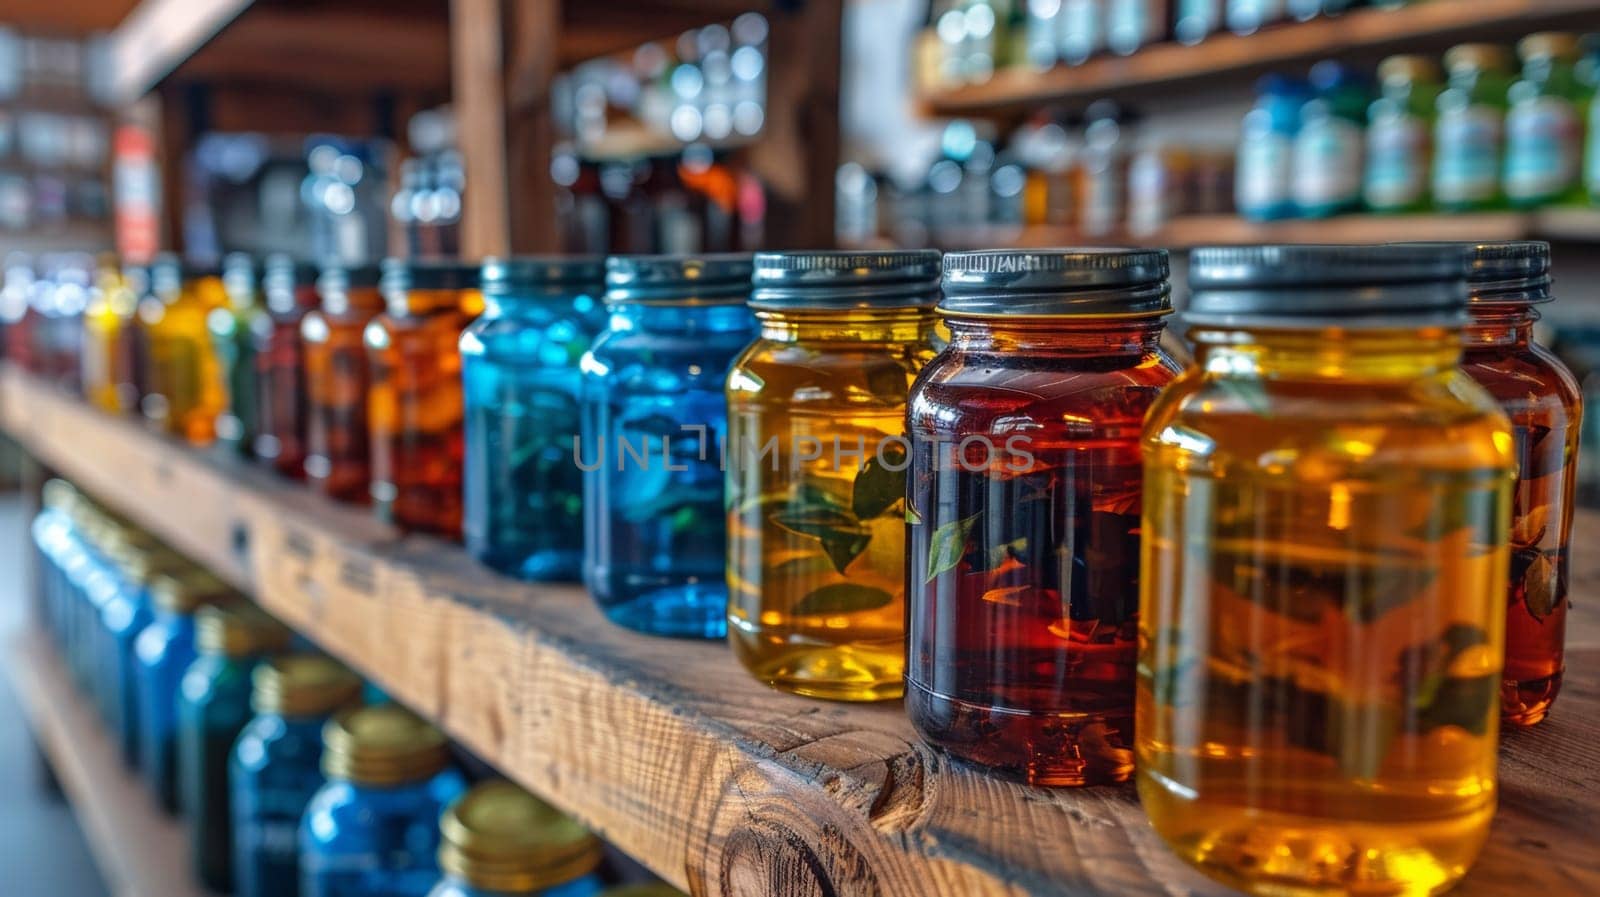 A row of jars filled with different colored liquids on a shelf